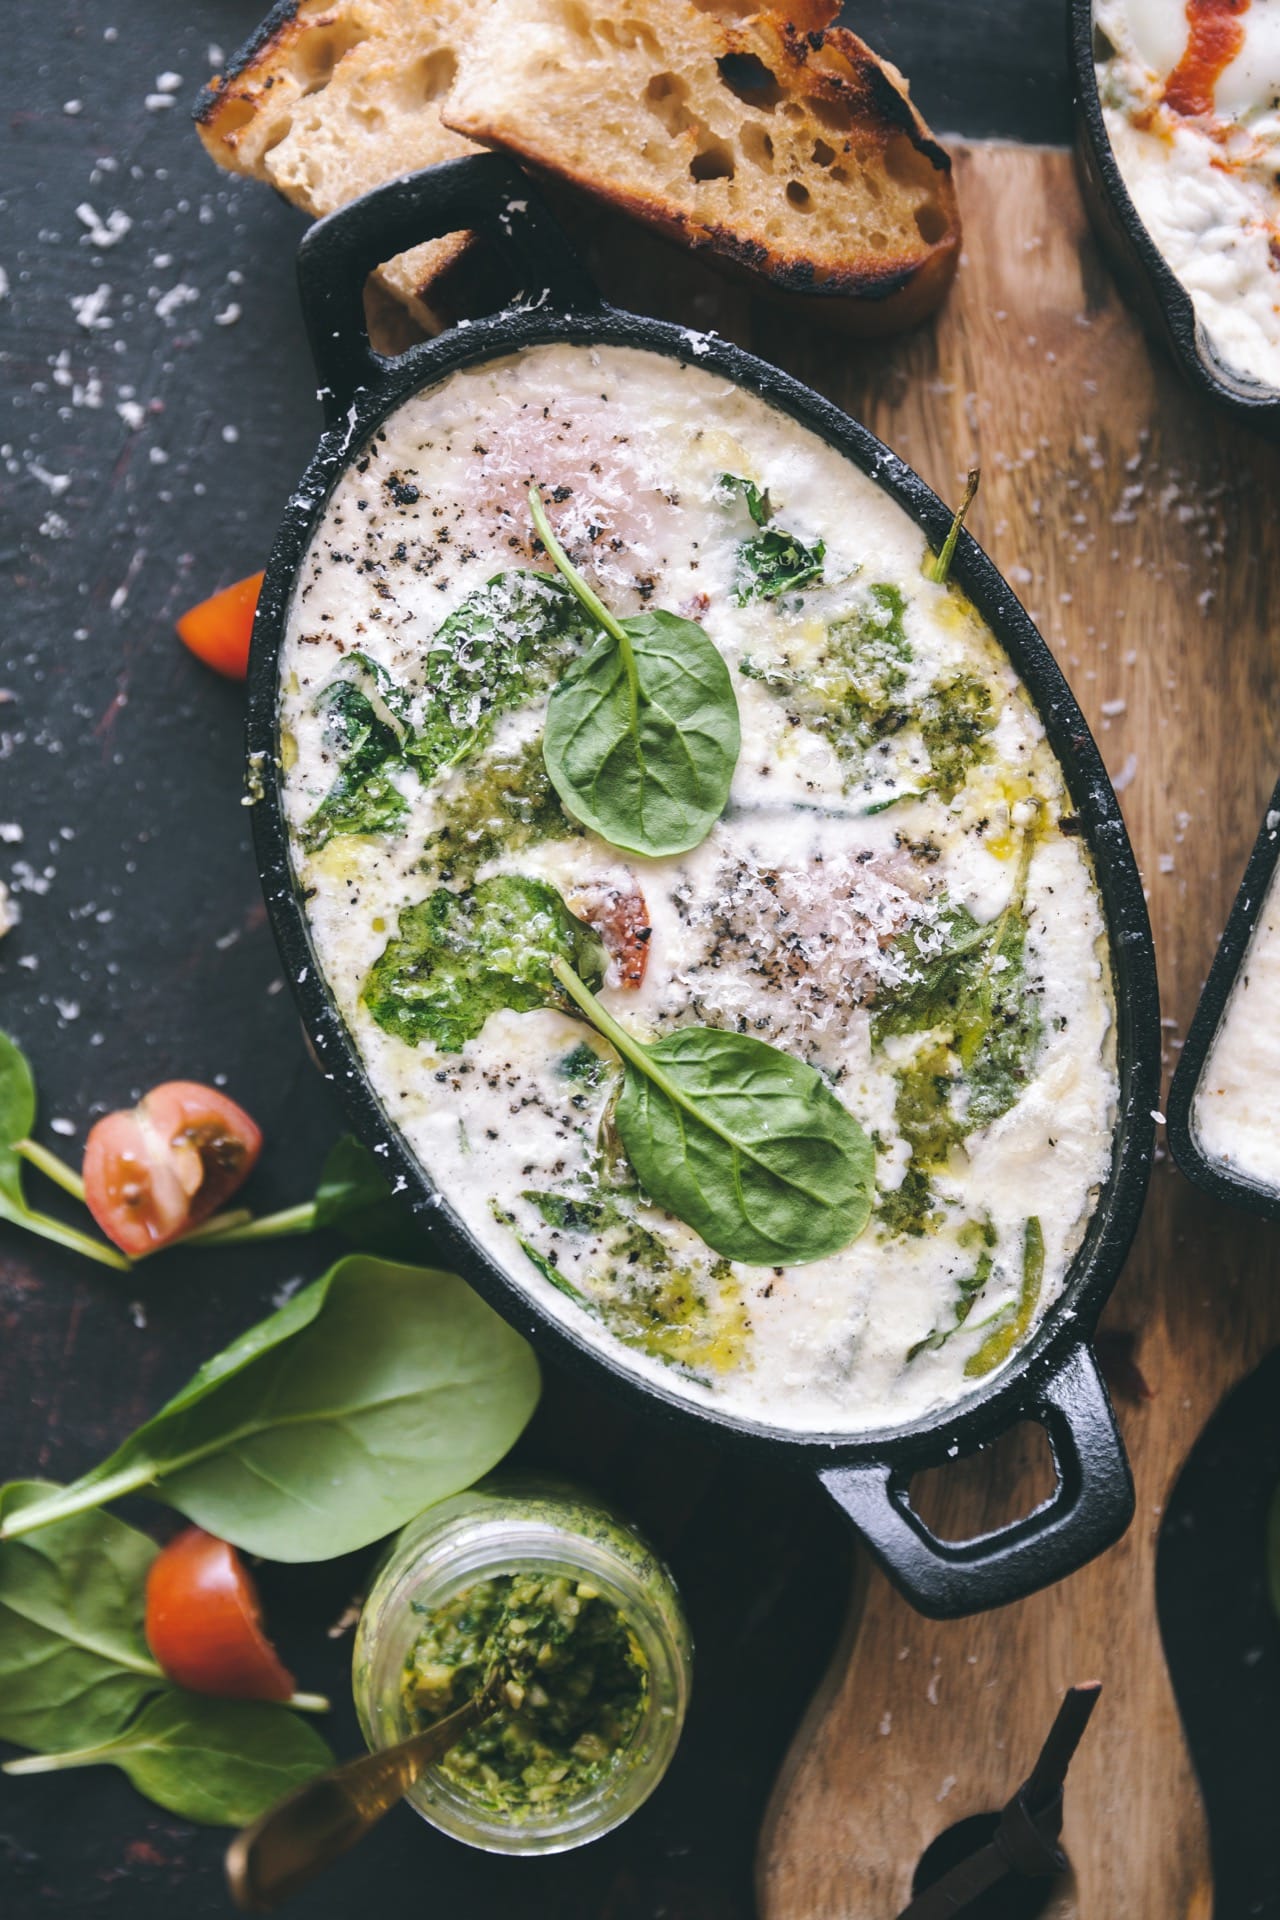 Spinach and Tomato Baked Eggs #foodphotography #foodstyling #bakedeggs #easyrecipe